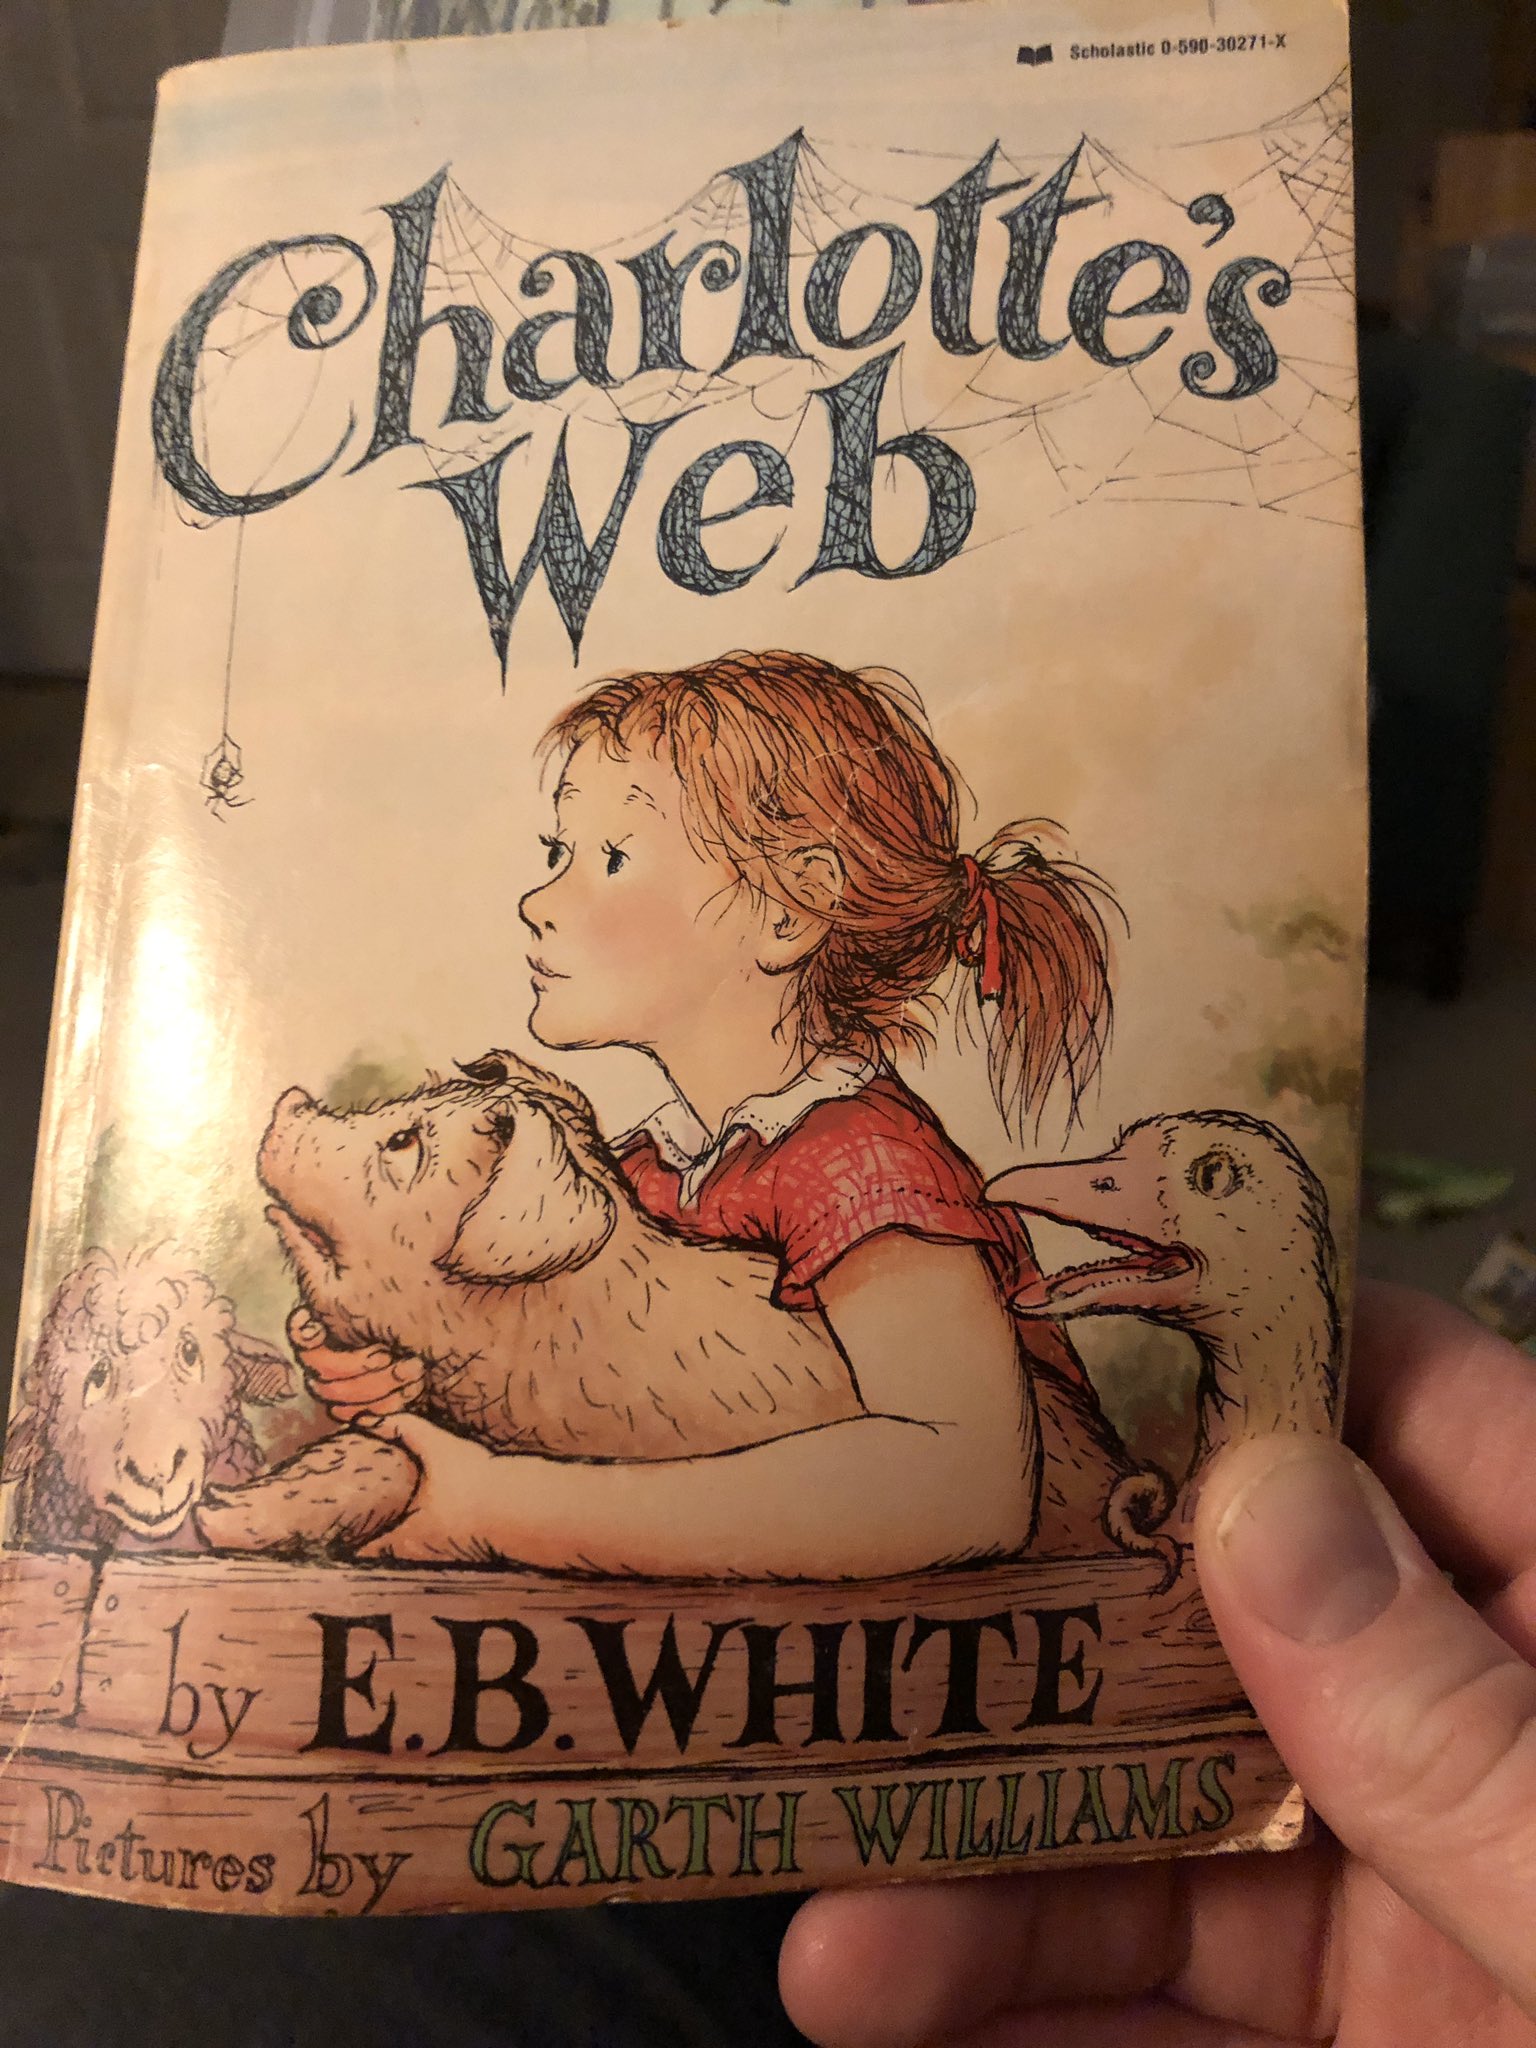 Holding Charlotte’s Web in my hand